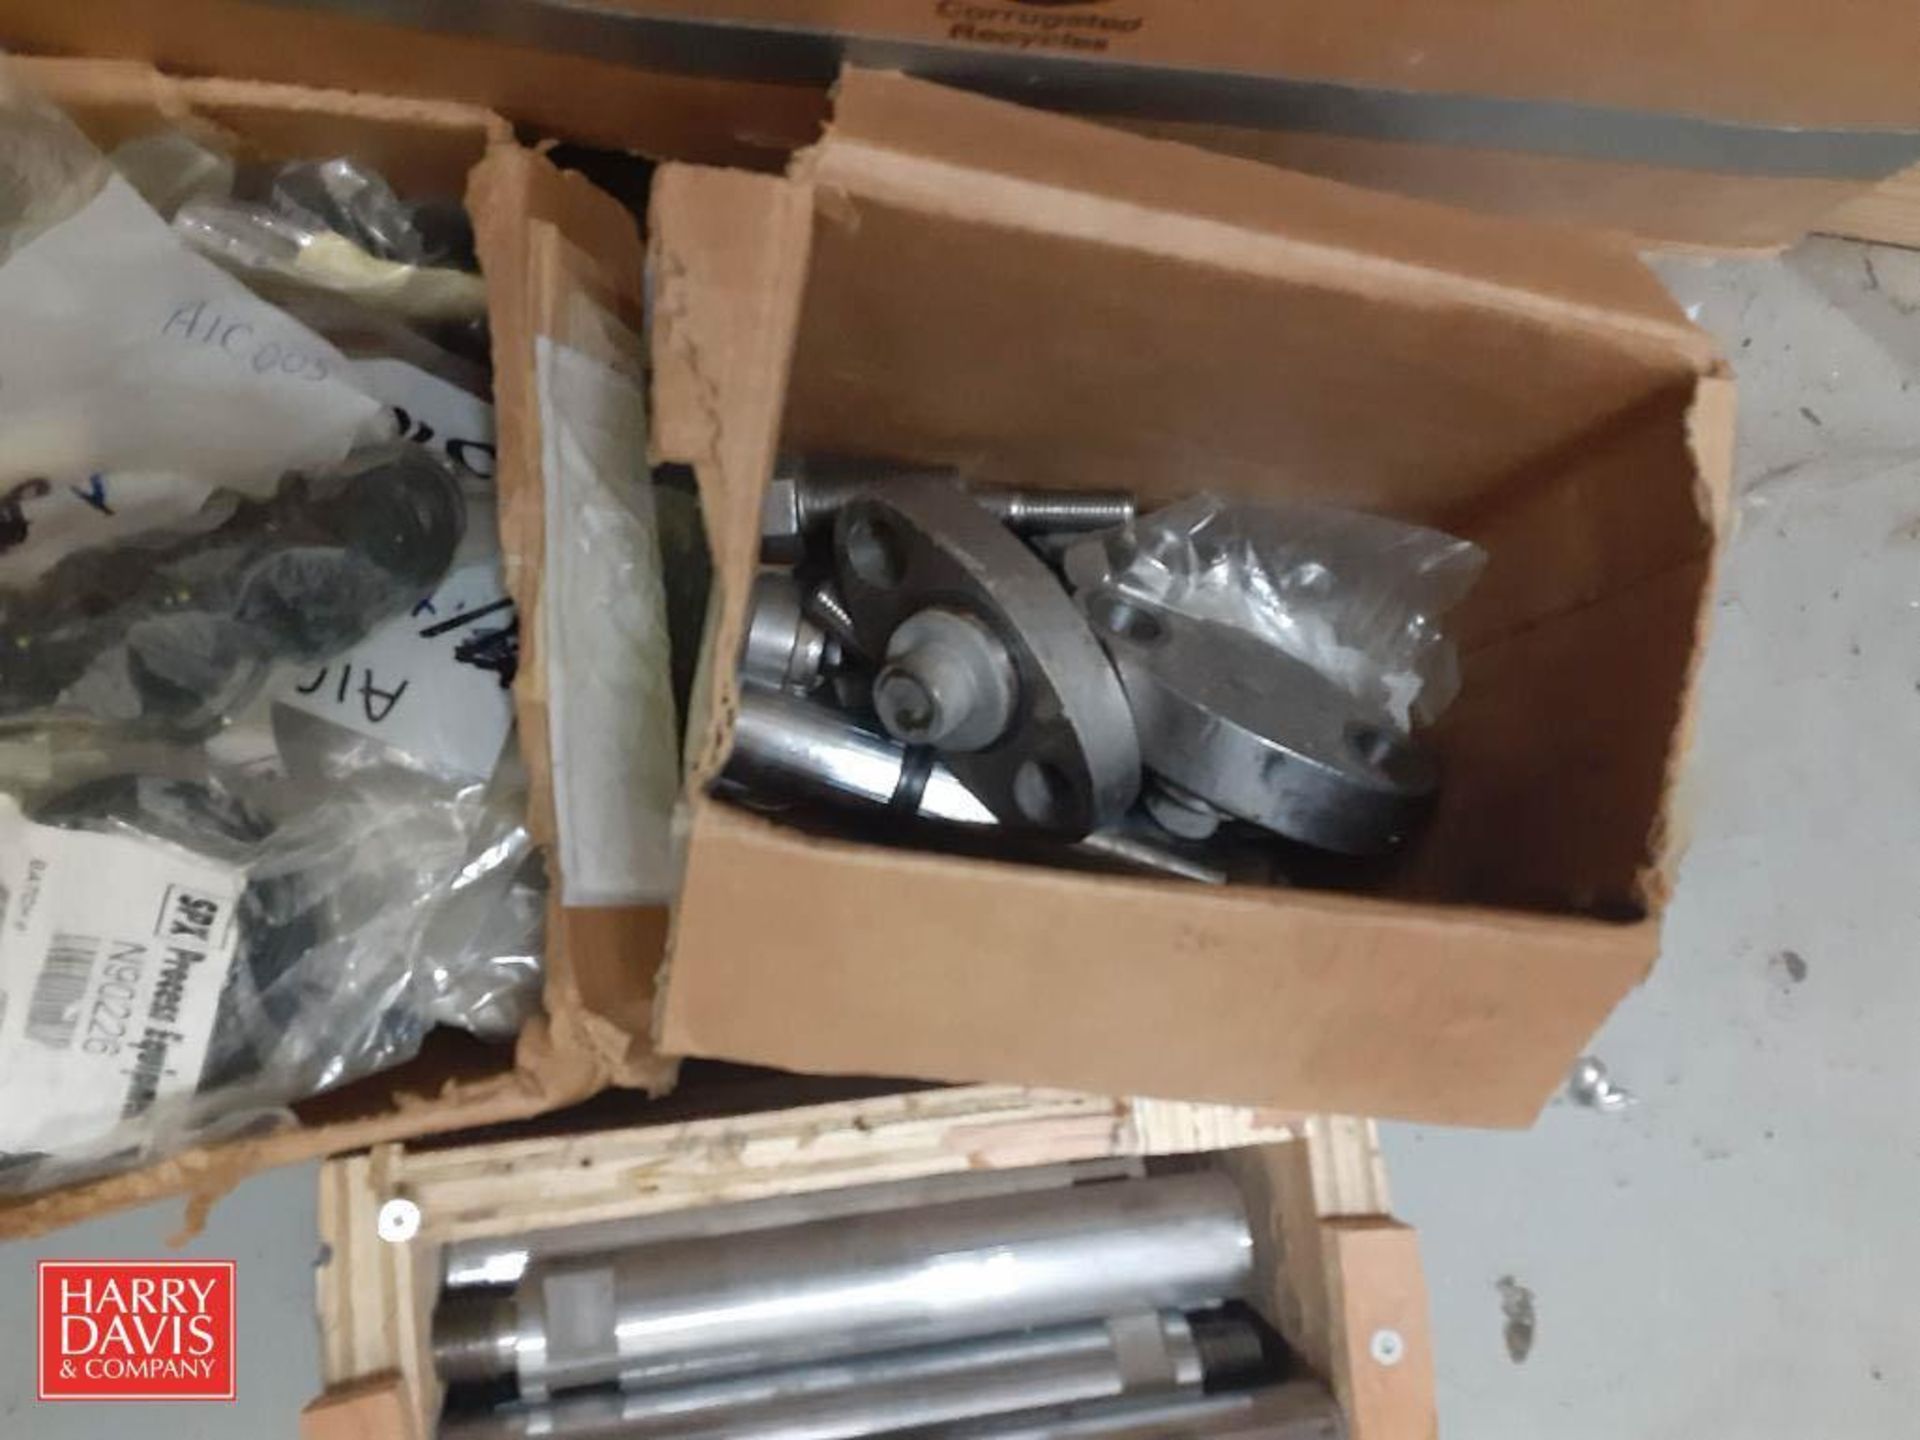 NEW SPX Homogenizer Parts, Including: Cylinder Block, Spare Plungers and Related Parts (for Homogeni - Image 2 of 5